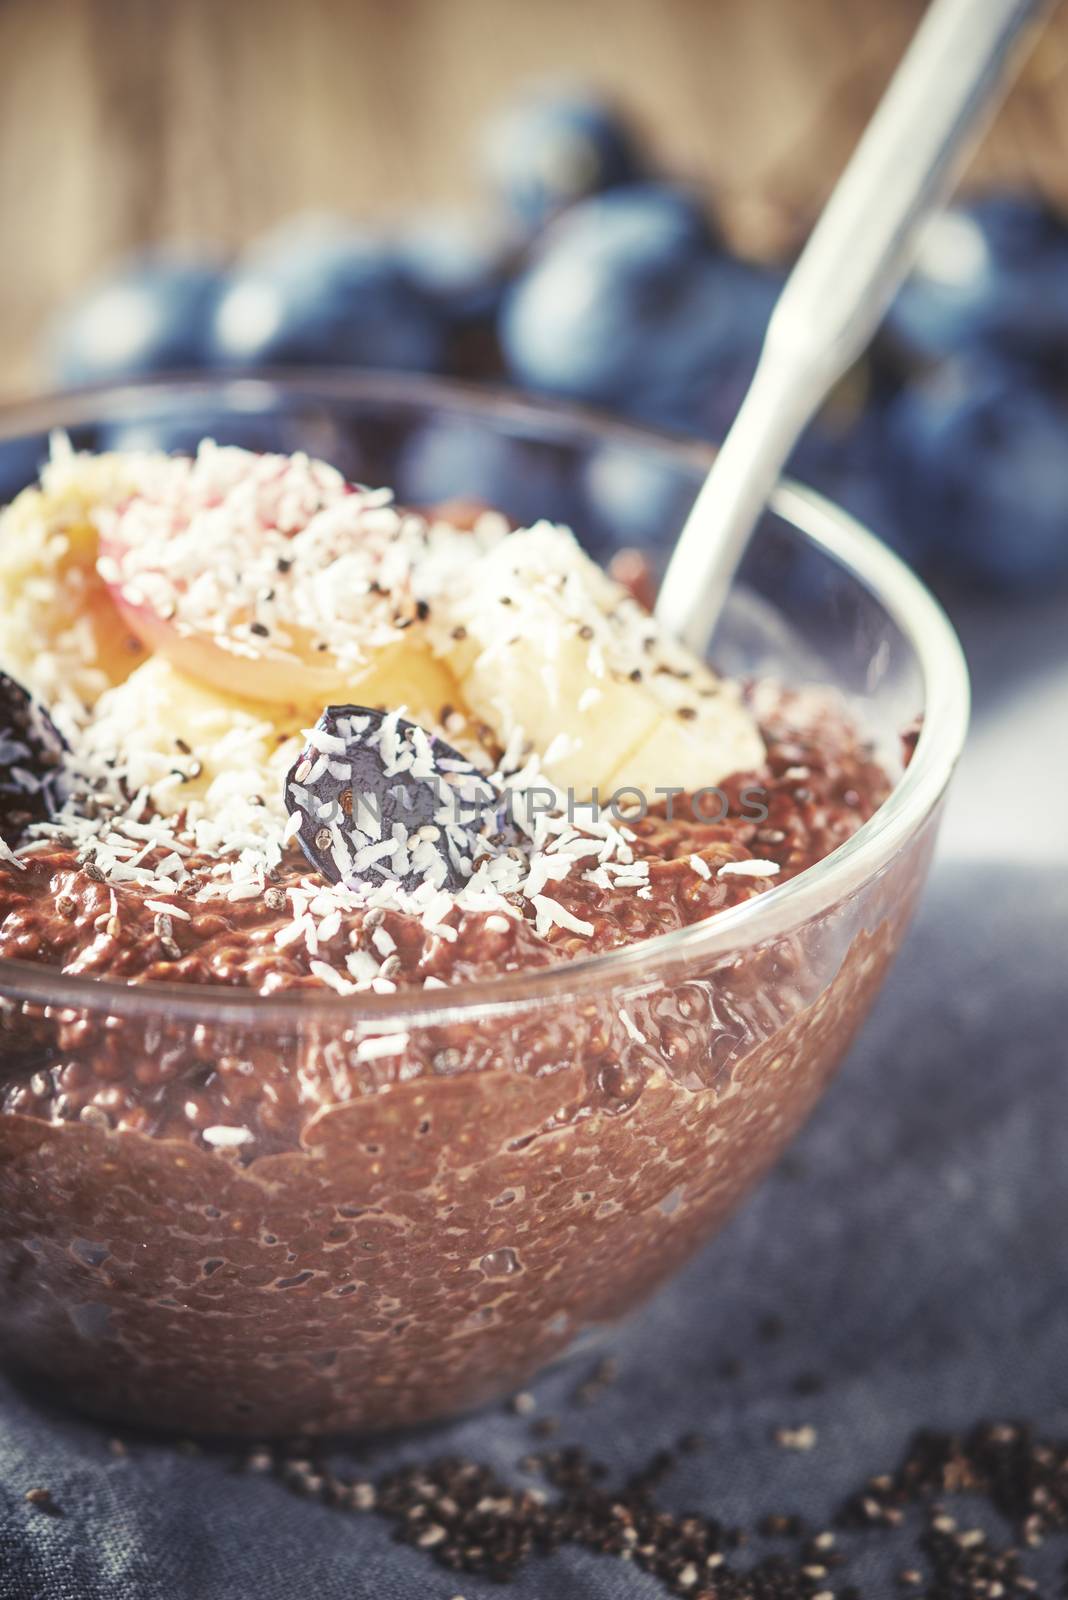 Chocolate chia pudding with fruits in the glass bowl